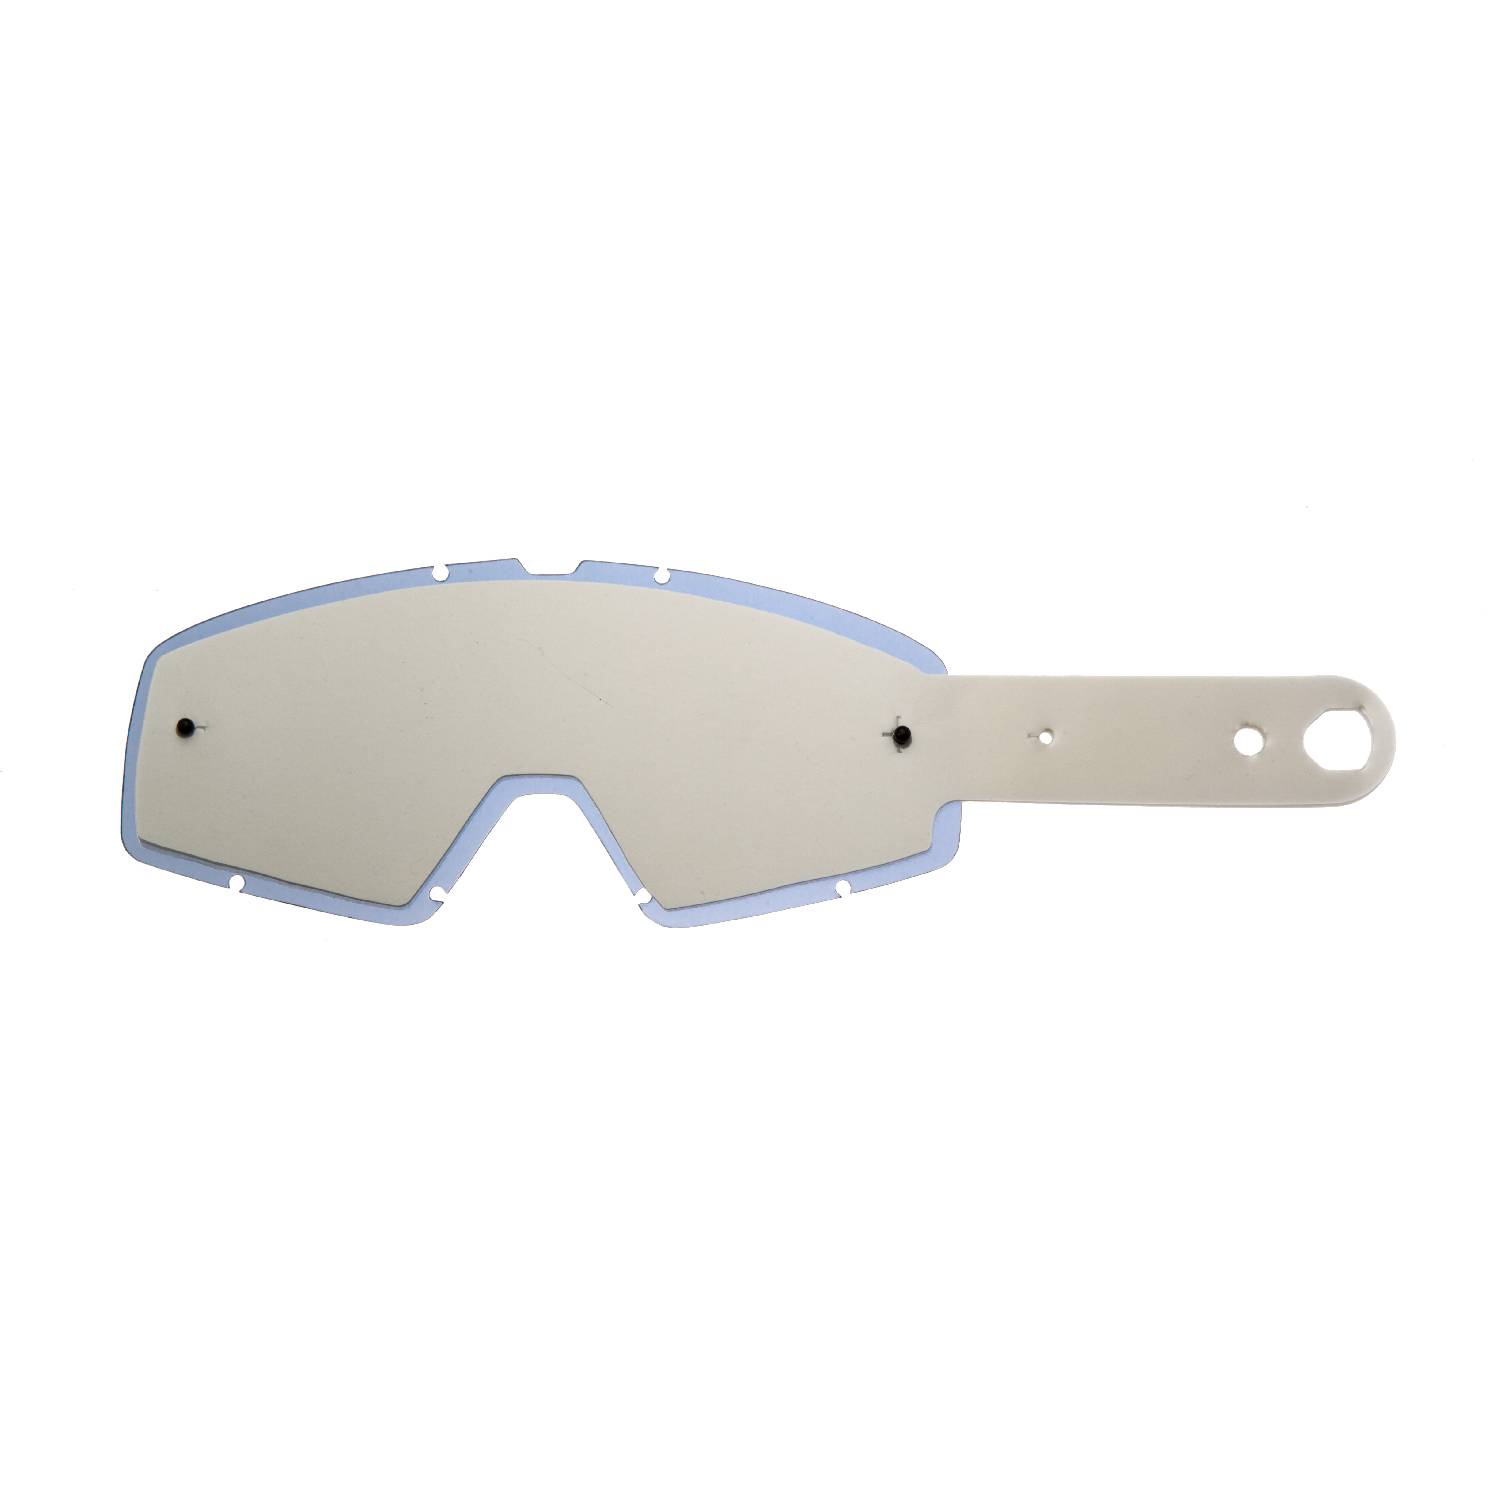 combo lenses with smokey lenses with 10 tear off compatible for Fox Main Pro Mx goggle